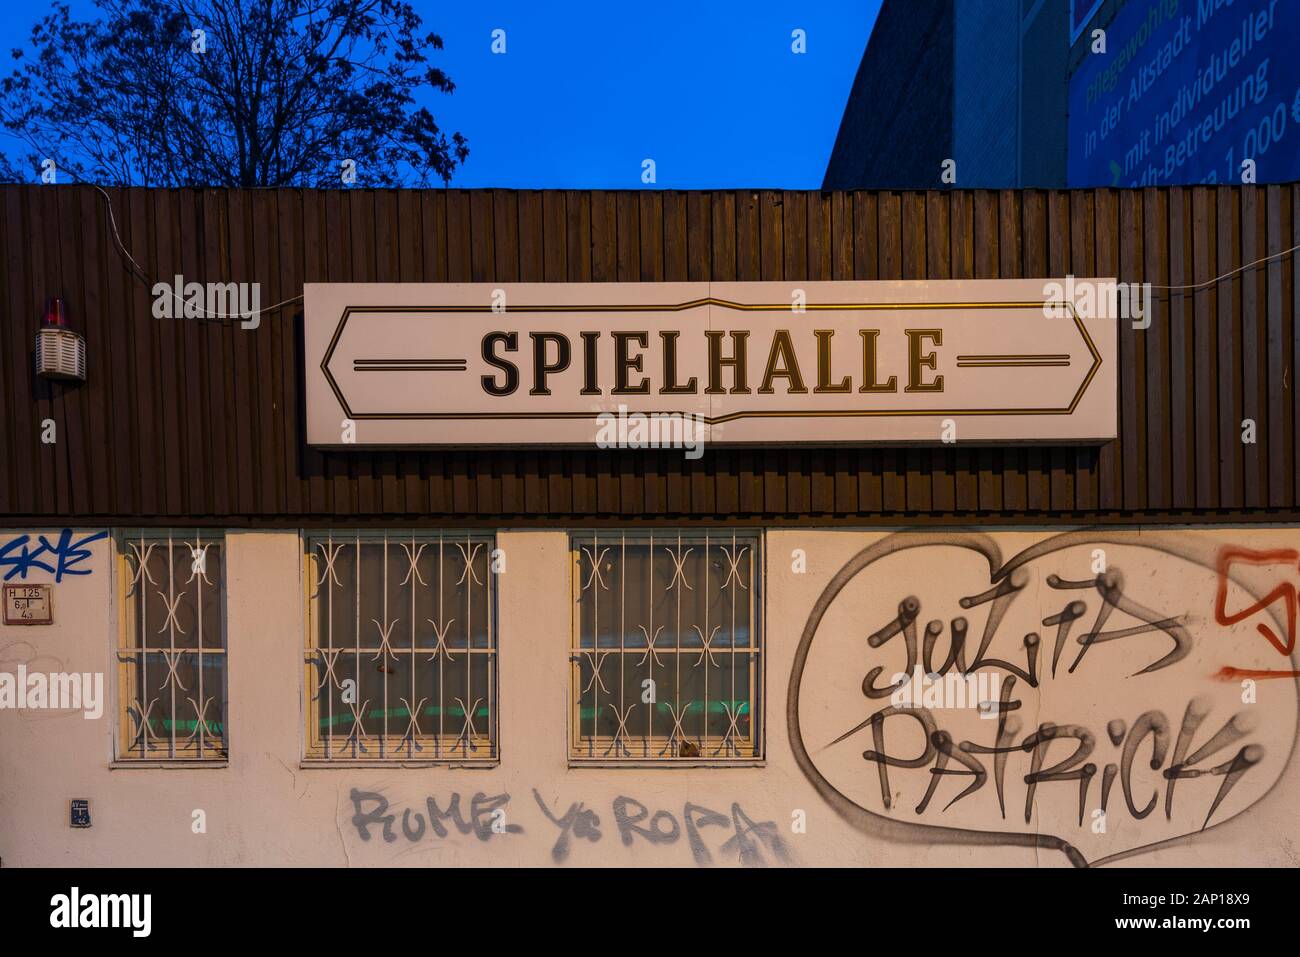 17 January 2020, Saxony-Anhalt, Magdeburg: The lettering 'Spielhalle' on a building with barred windows. Photo: Stephan Schulz/dpa-Zentralbild/ZB Stock Photo